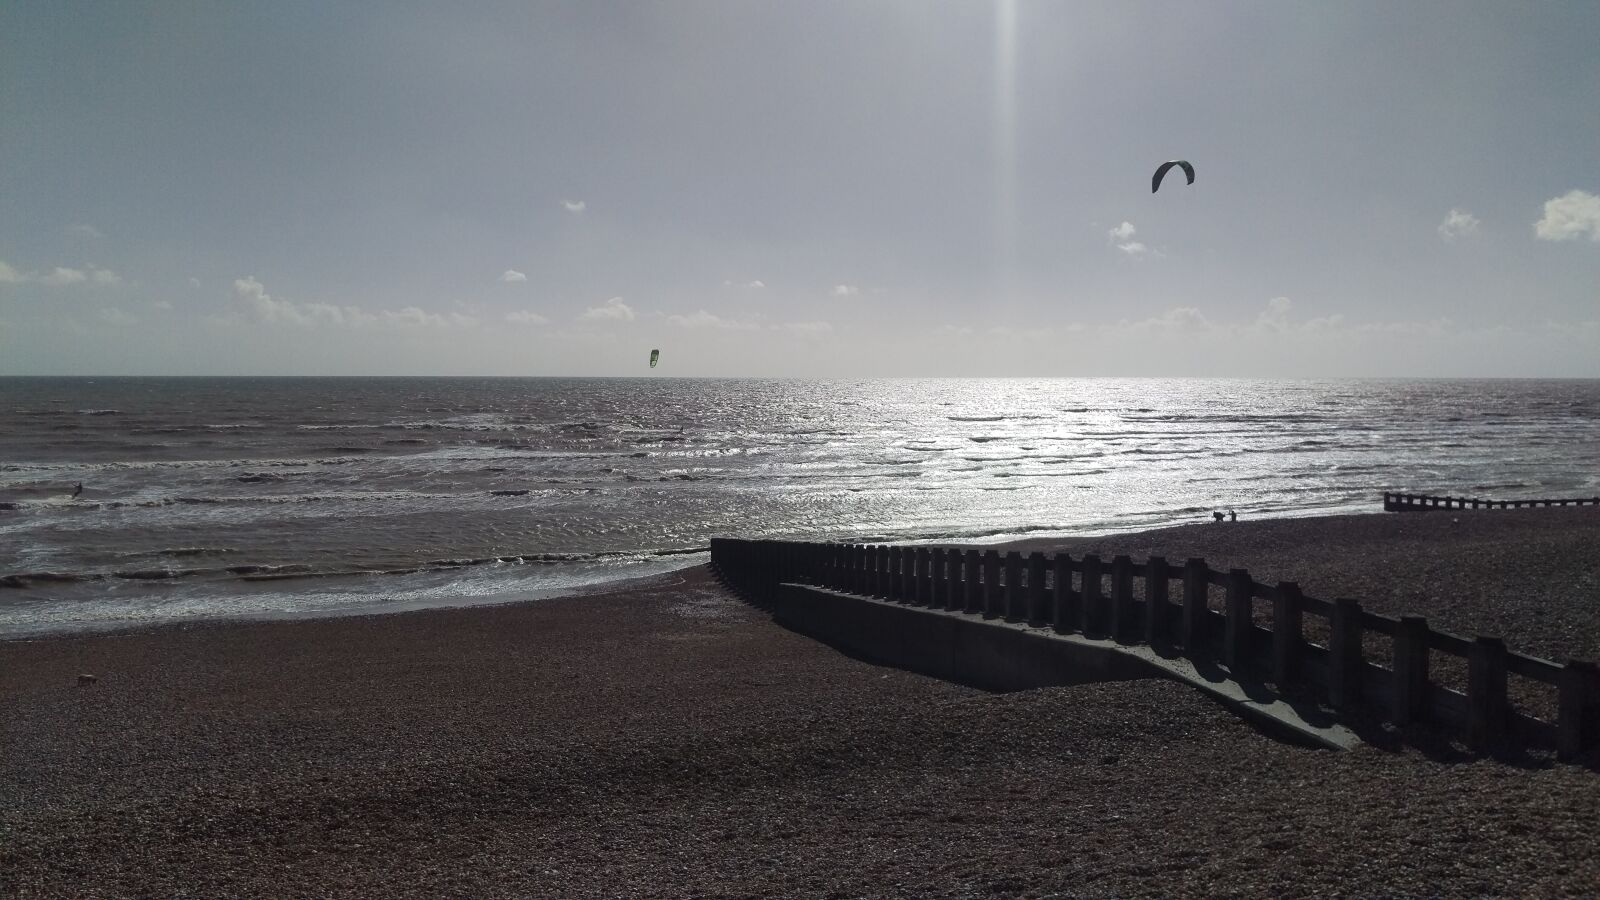 HTC ONE M9 sample photo. Kite surfing, beach, waves photography